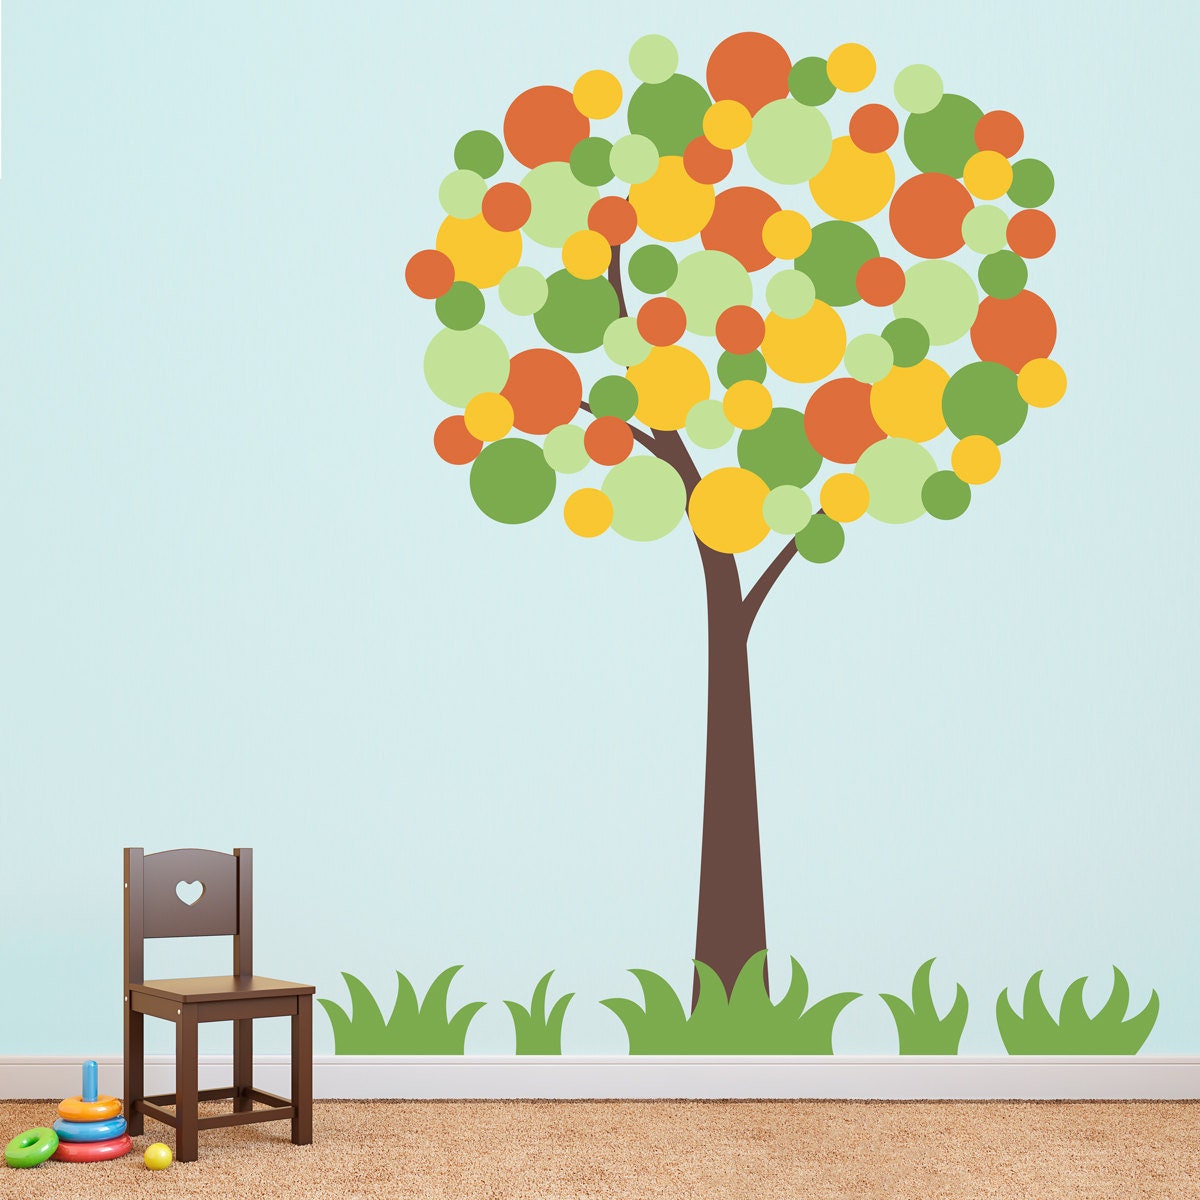 Polka Dot Tree Wall Decal with Grass - Playroom Decor - Children Wall Decals - Extra Large